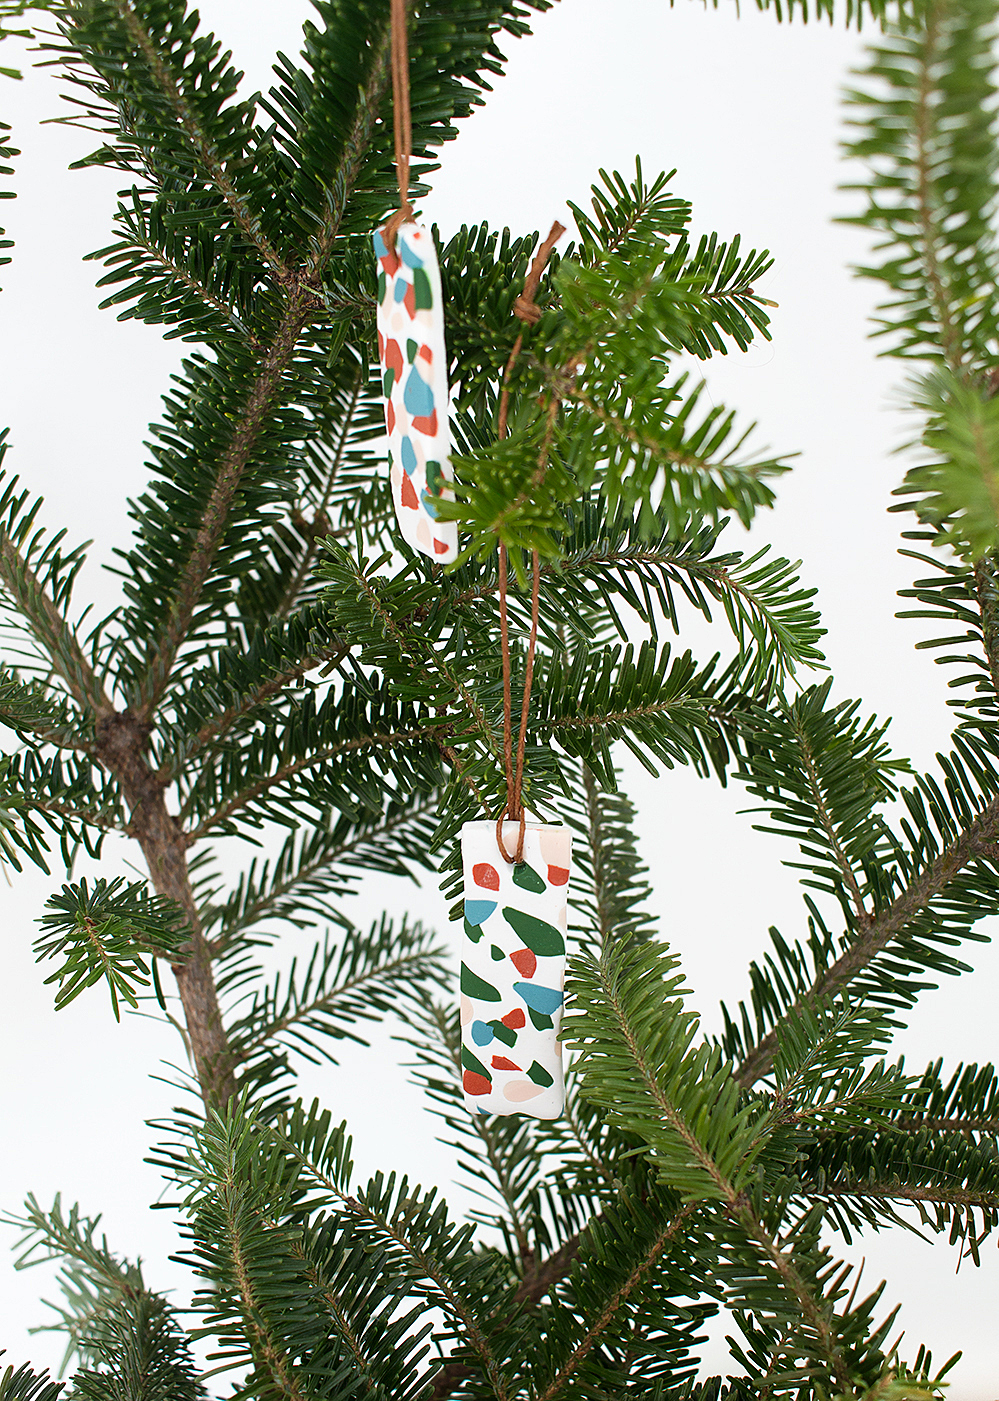 Make these easy and fun DIY terrazzo tile ornaments for a modern, colorful addition to your holiday decor.